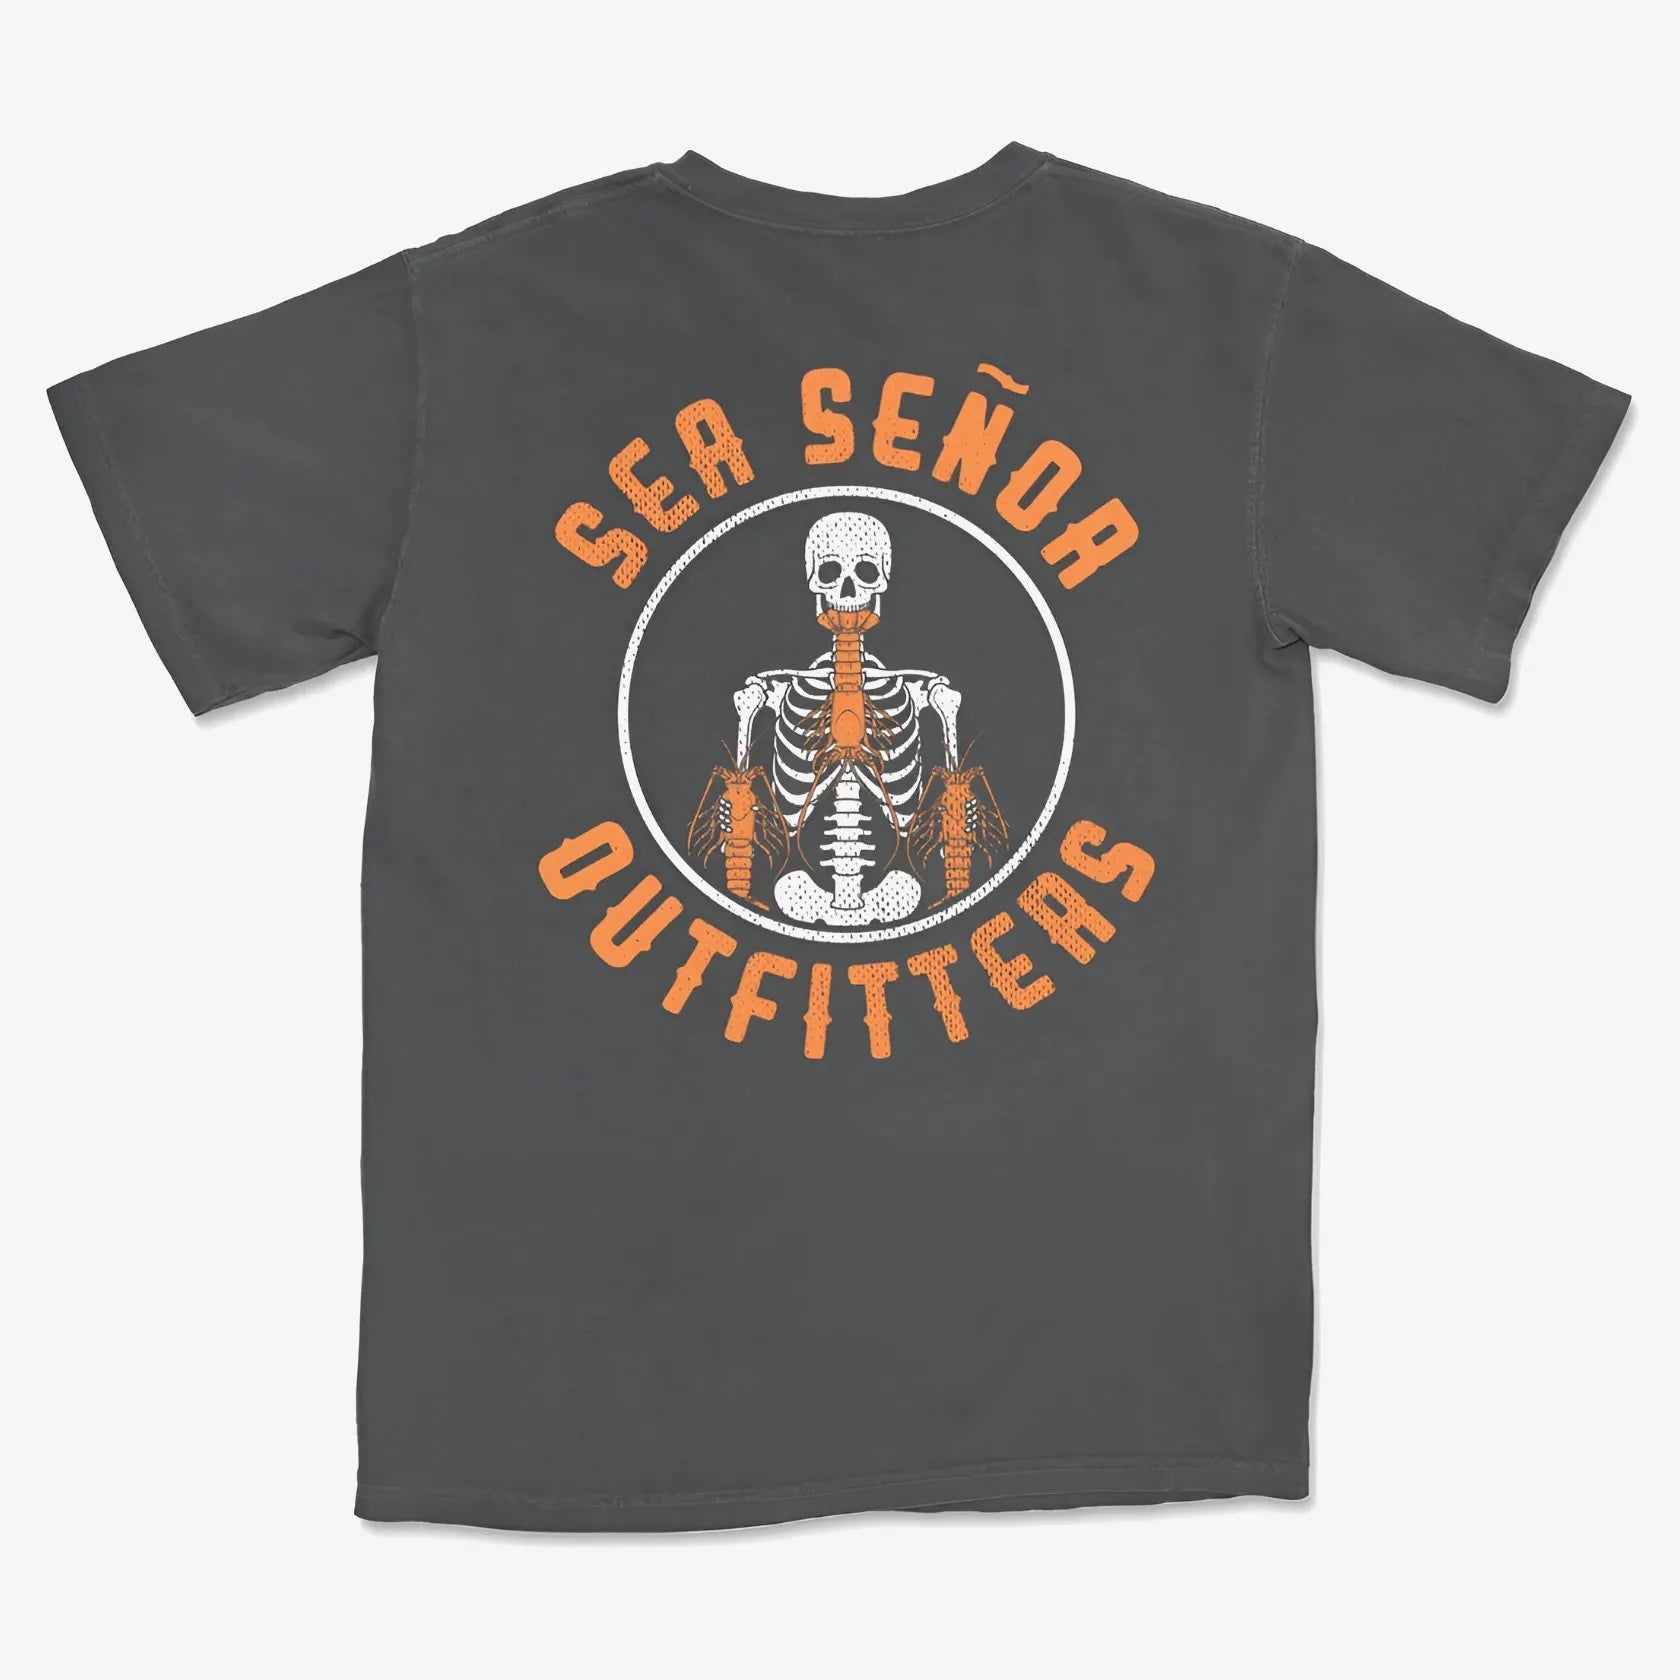 Lobster Hunter - Sea Señor Outfitters